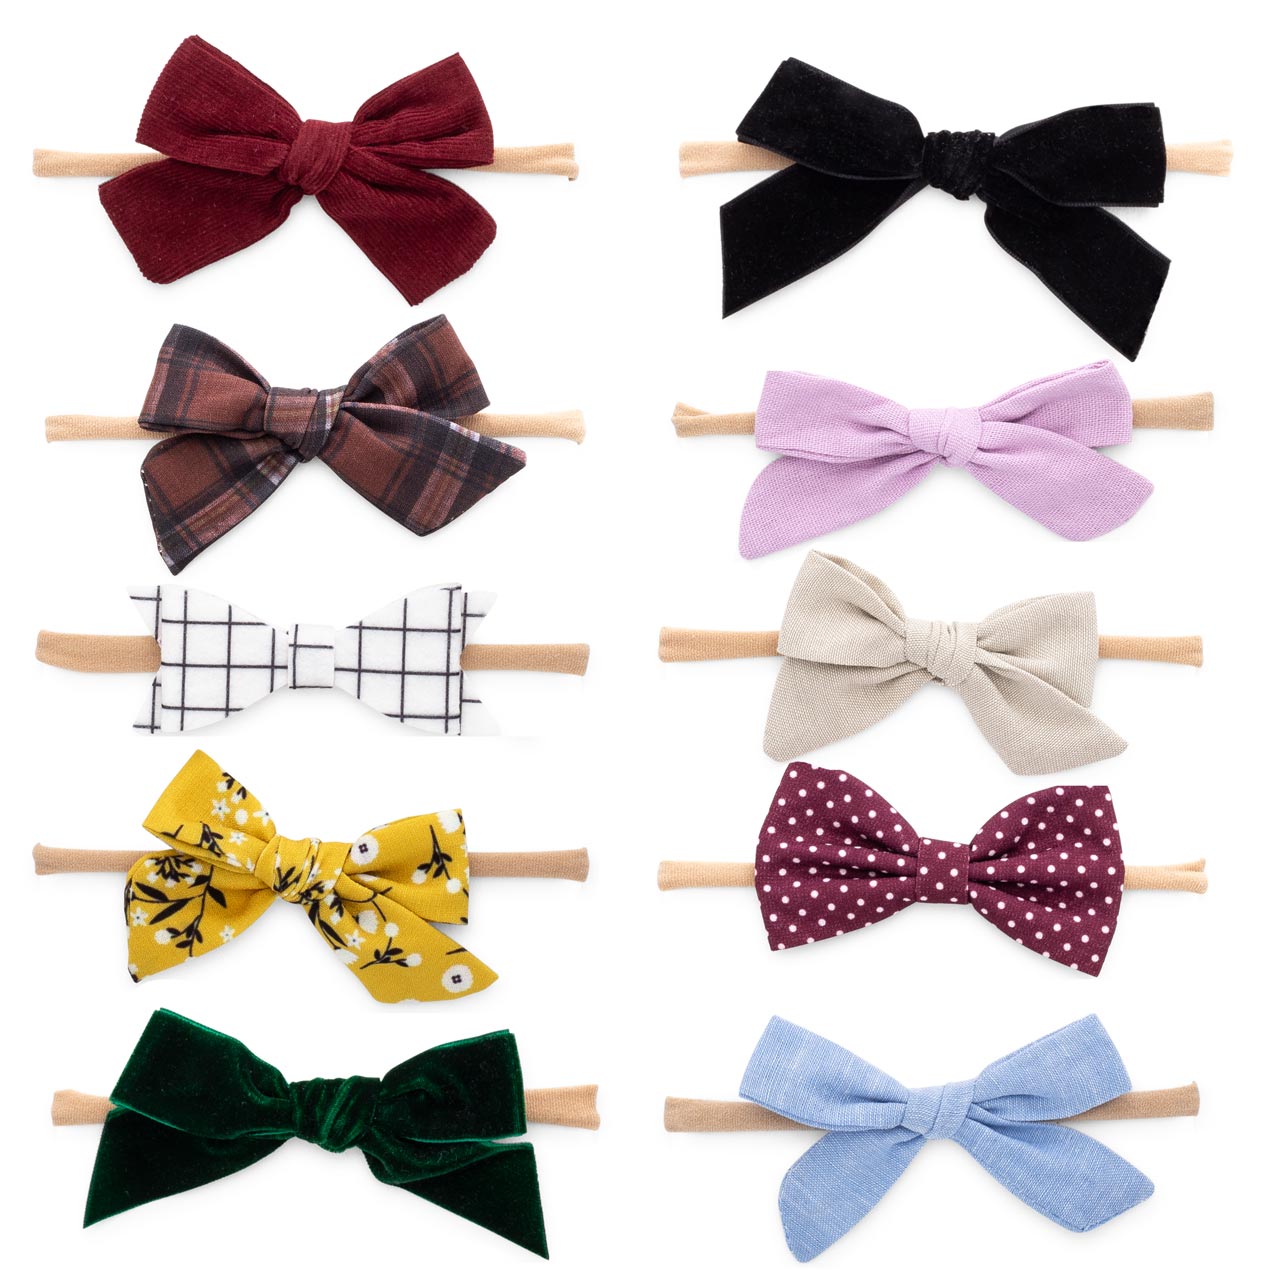 10 Assorted Bow Headbands for baby, toddler and little girls.